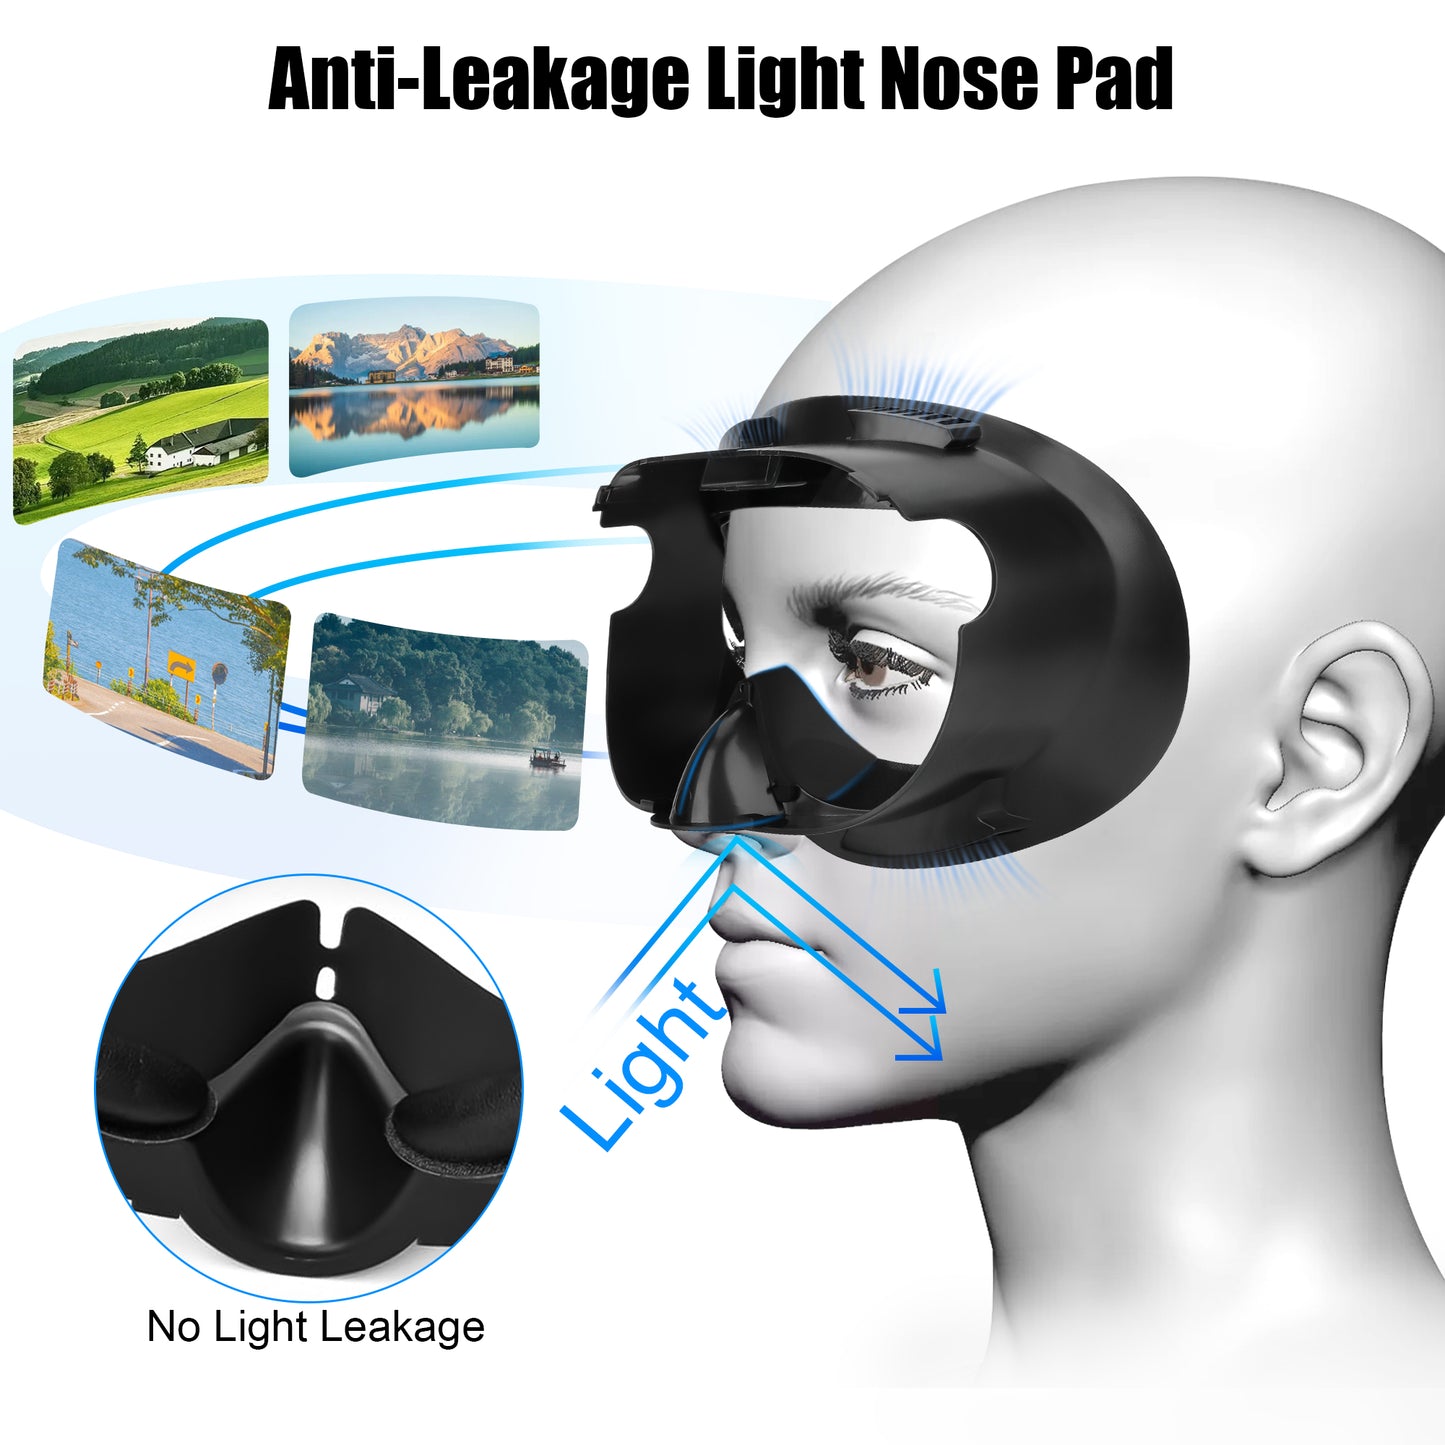 Widened Facial interface Pad Replacement for Meta Quest 3 - PU Foam Cushion Anti Leakage Light Nose Pad and Lens Protector,Air-Circulation Design (Black)